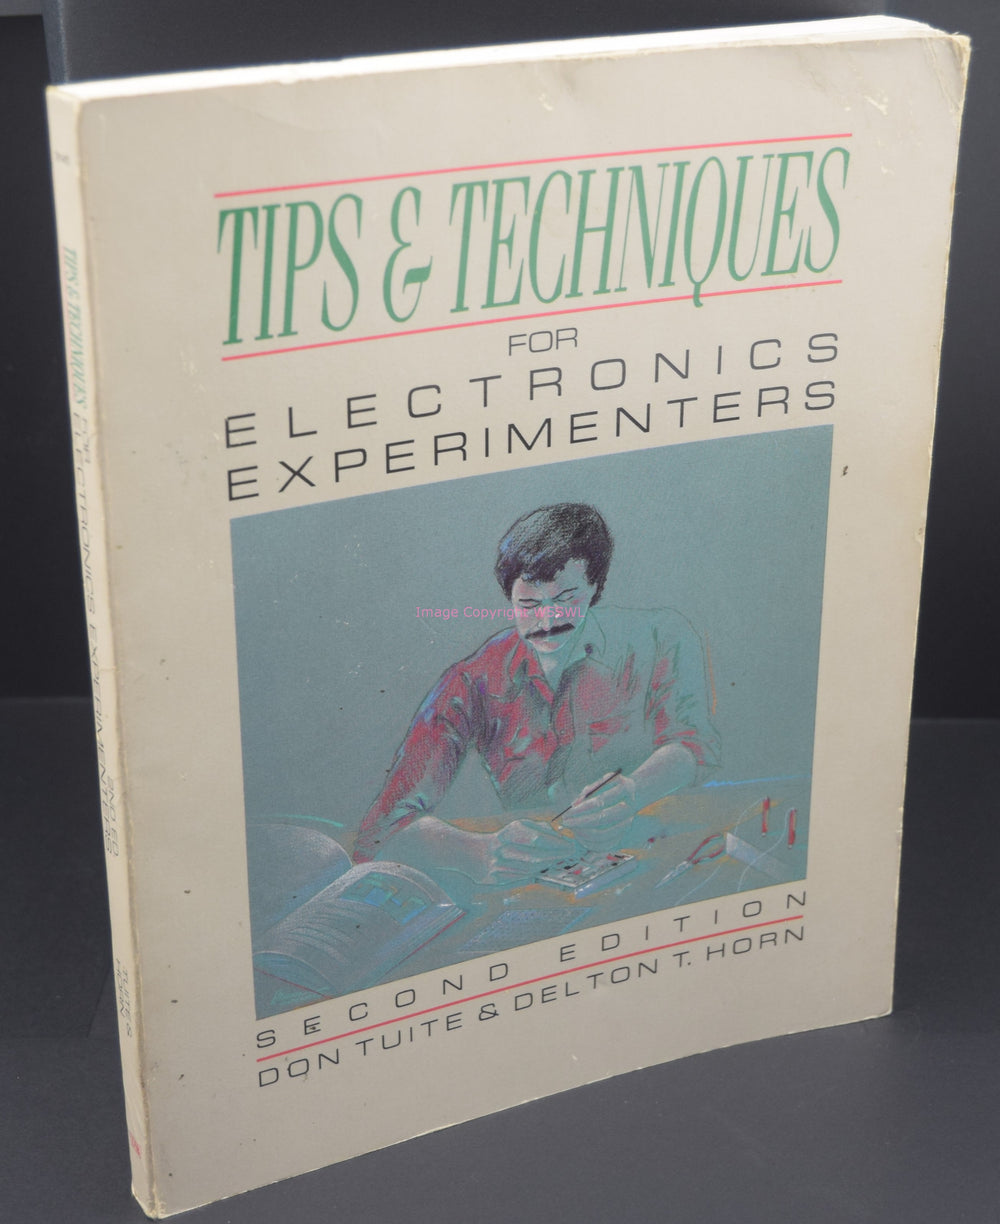 Tips & Techniques For Electronics Experimenters 2nd Edition Tab Books - Dave's Hobby Shop by W5SWL